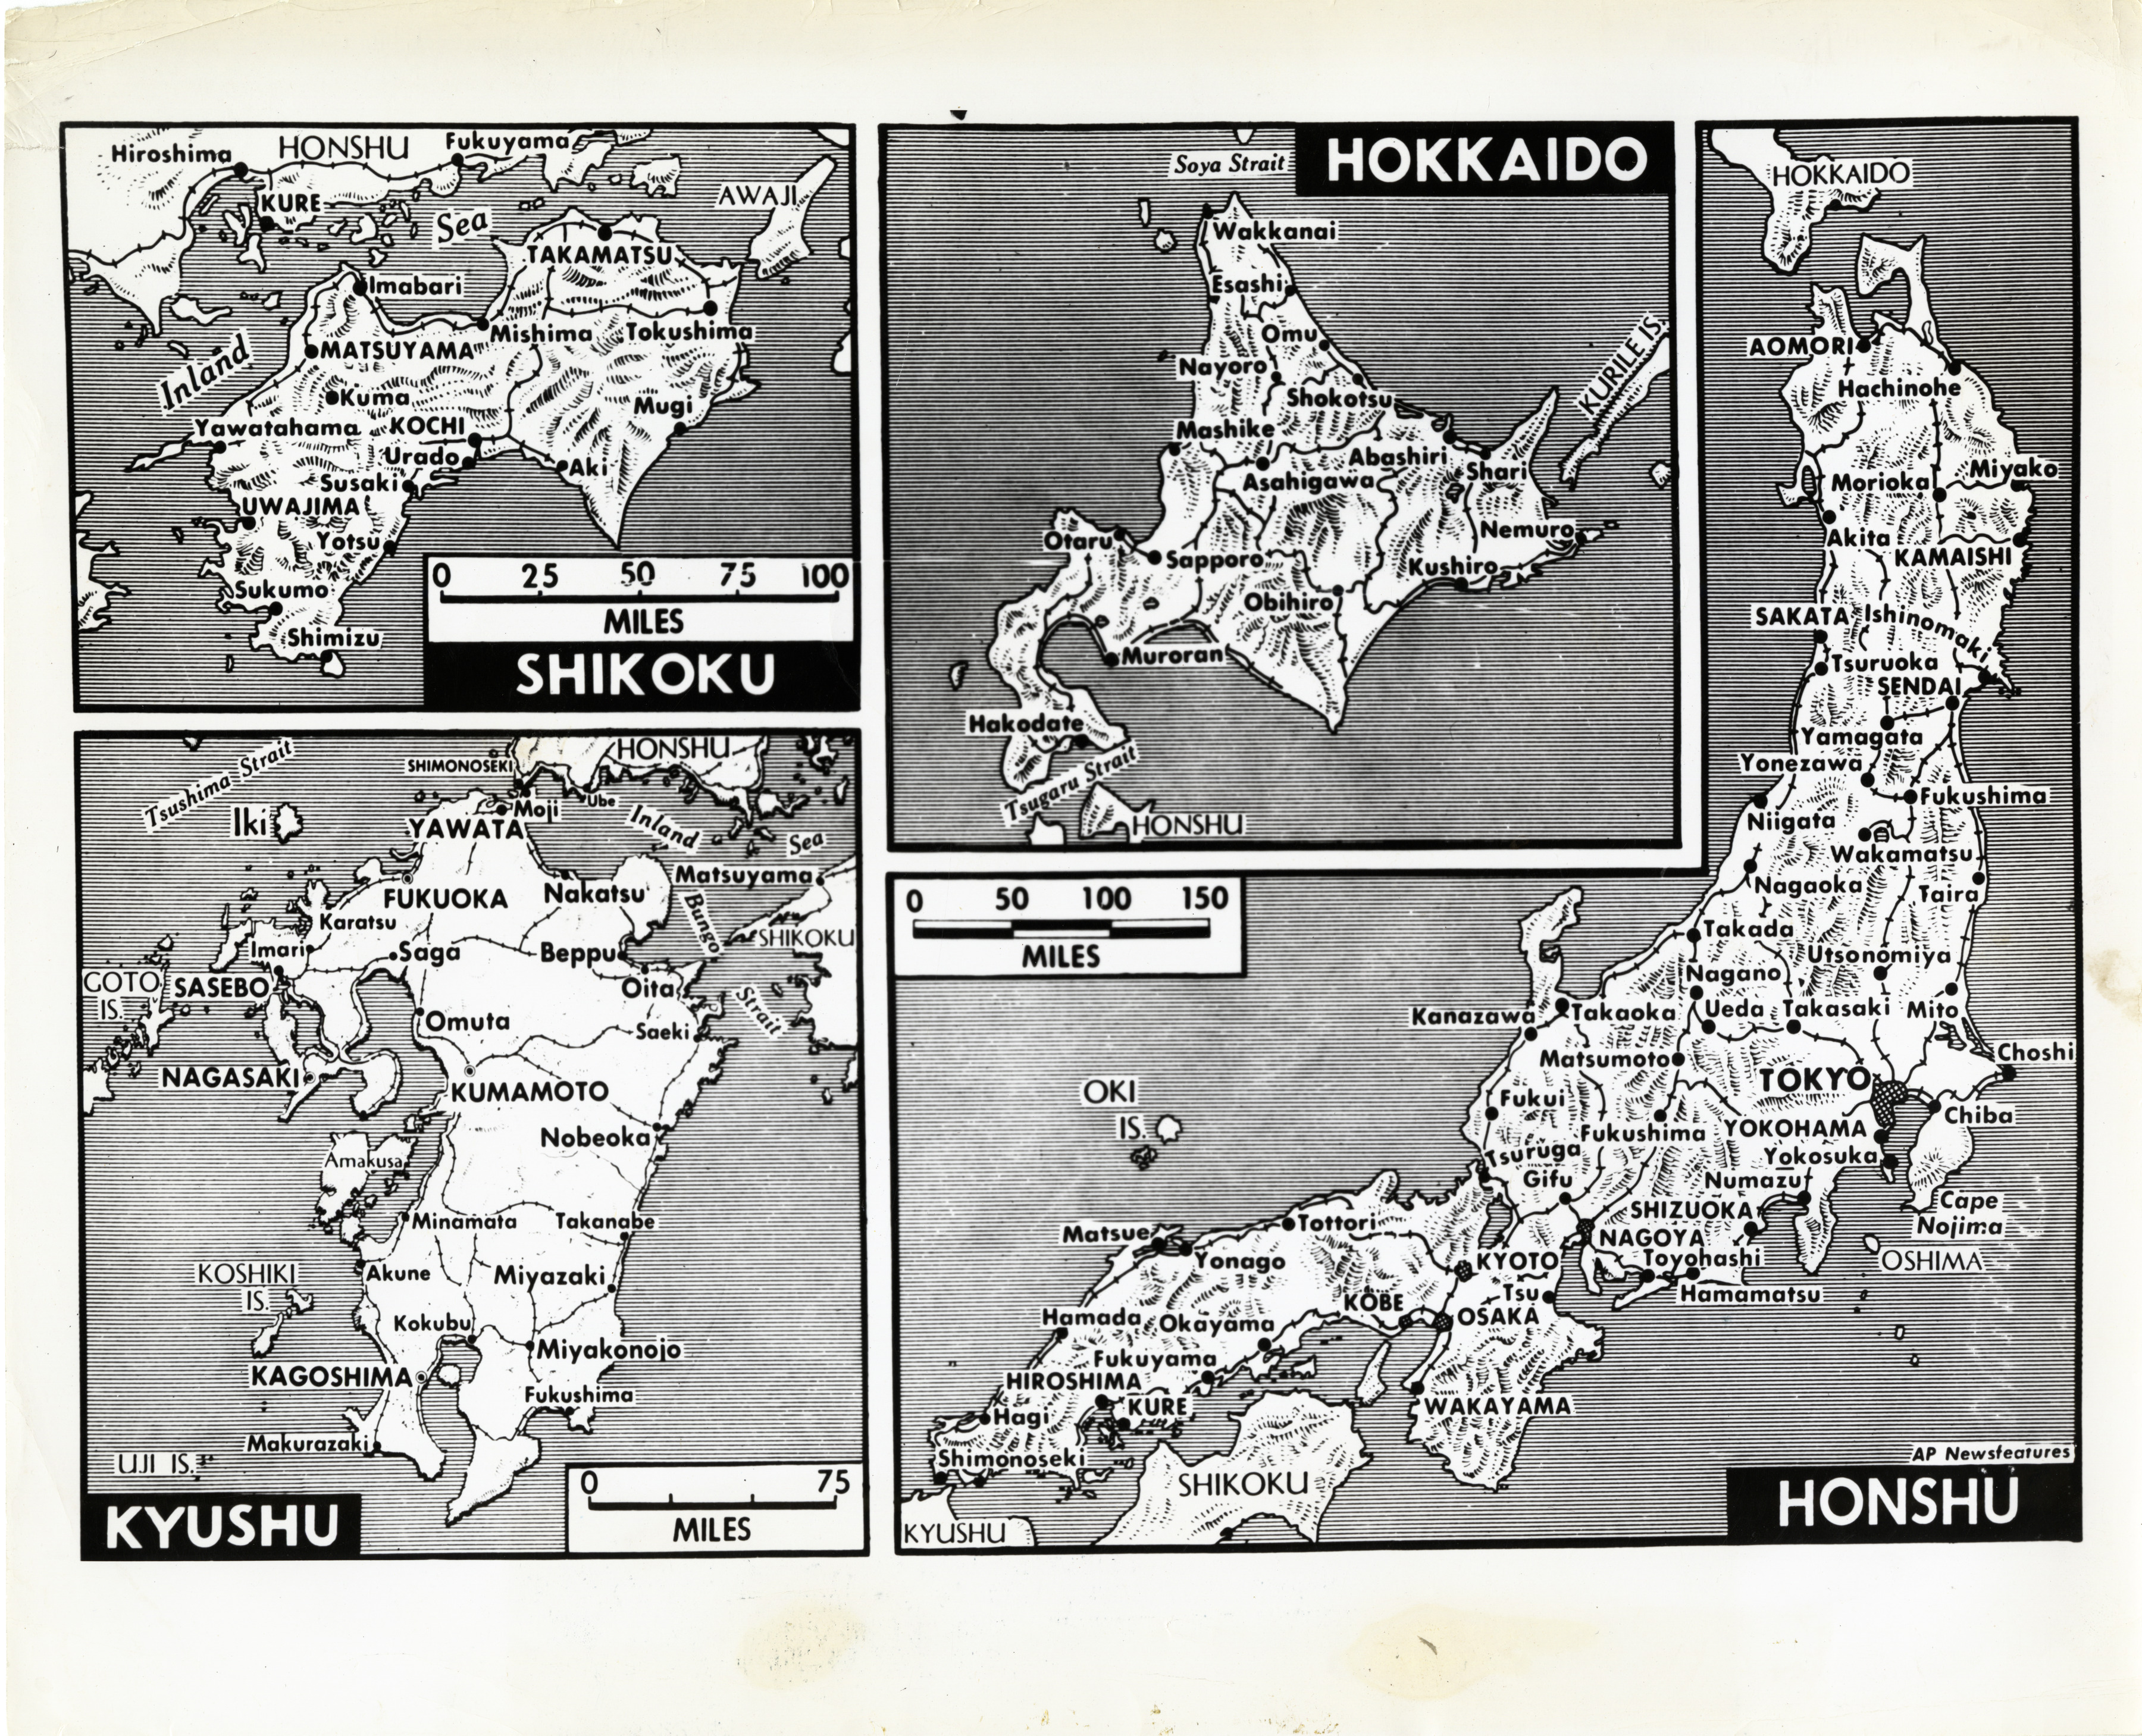 American map of Japanese "Home Islands", 1945 | The Digital ...